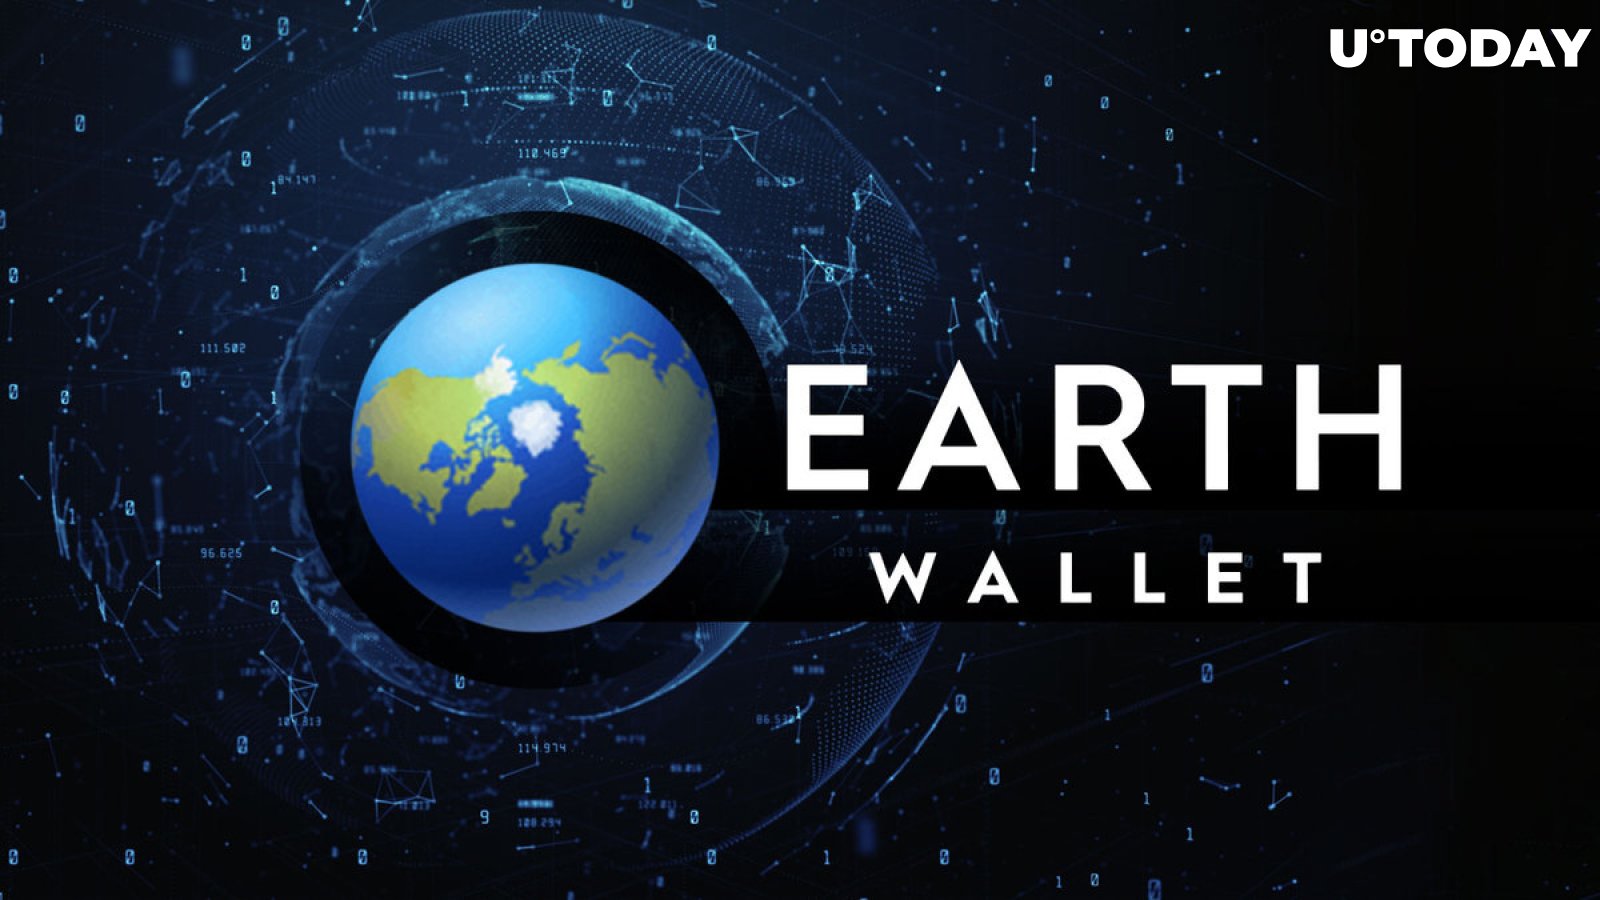 Earth Wallet Completes Third-Party Security Audit: Details